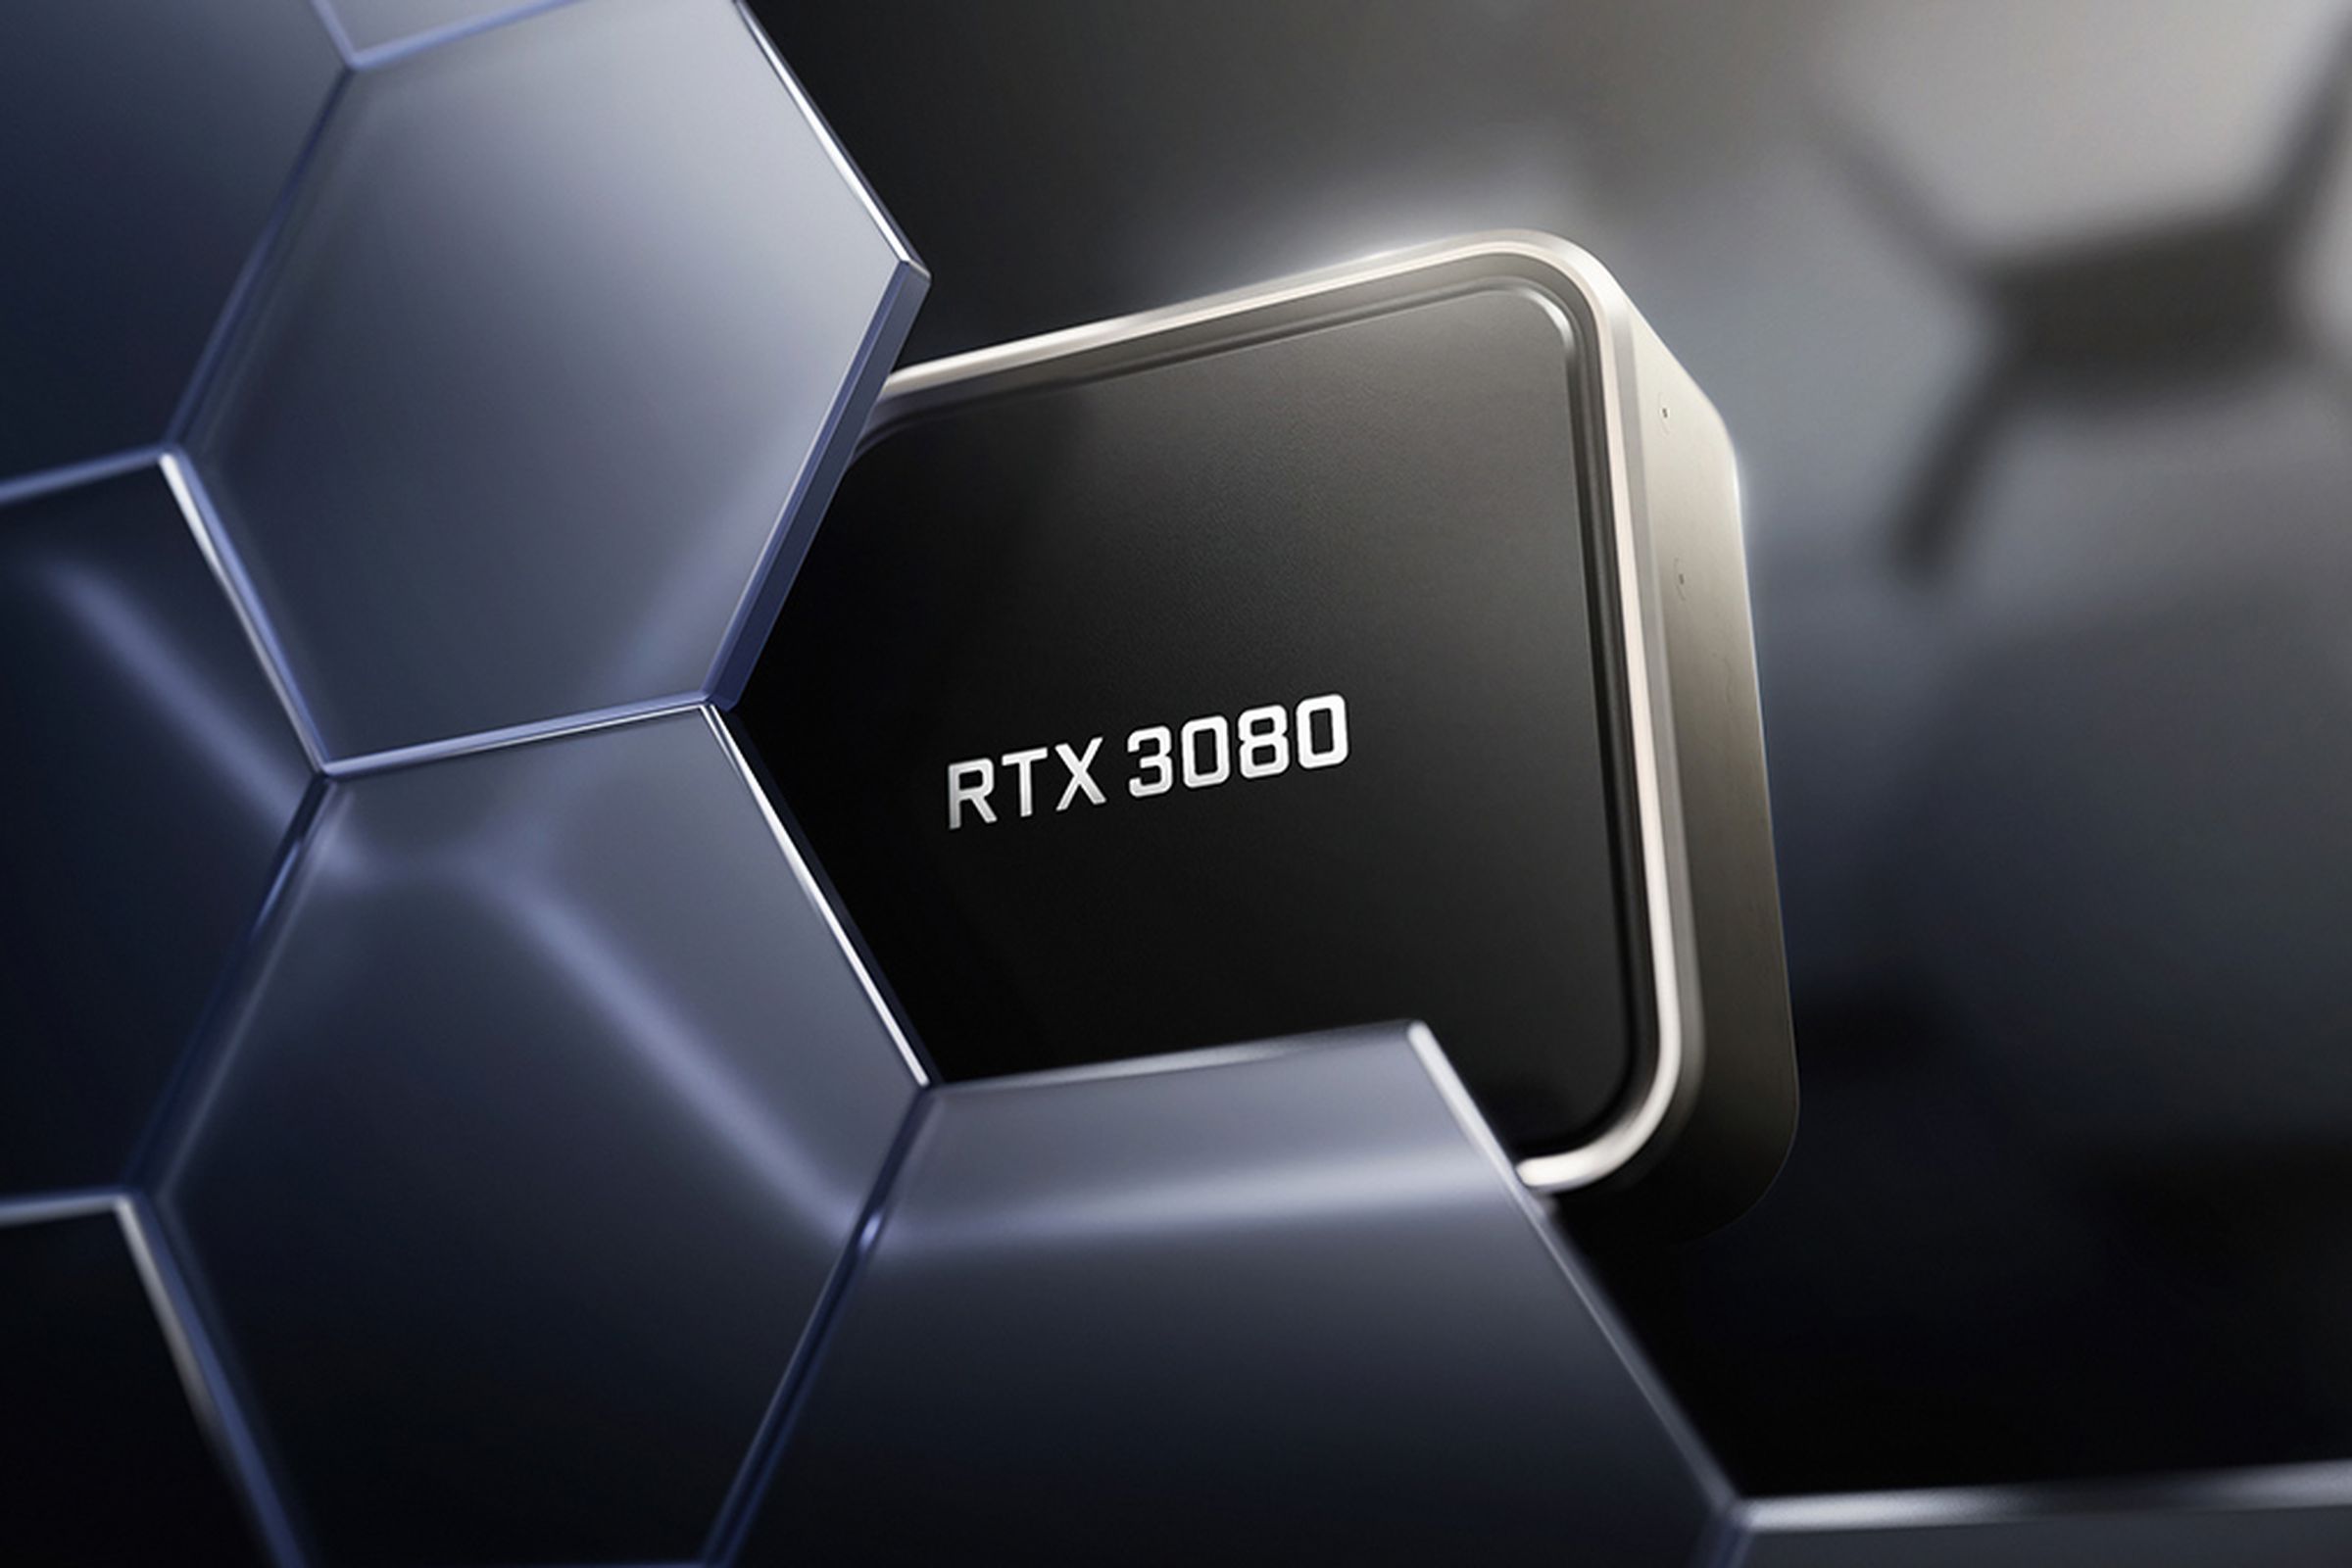 RTX 3080s are heading to Nvidia’s GeForce Now service.